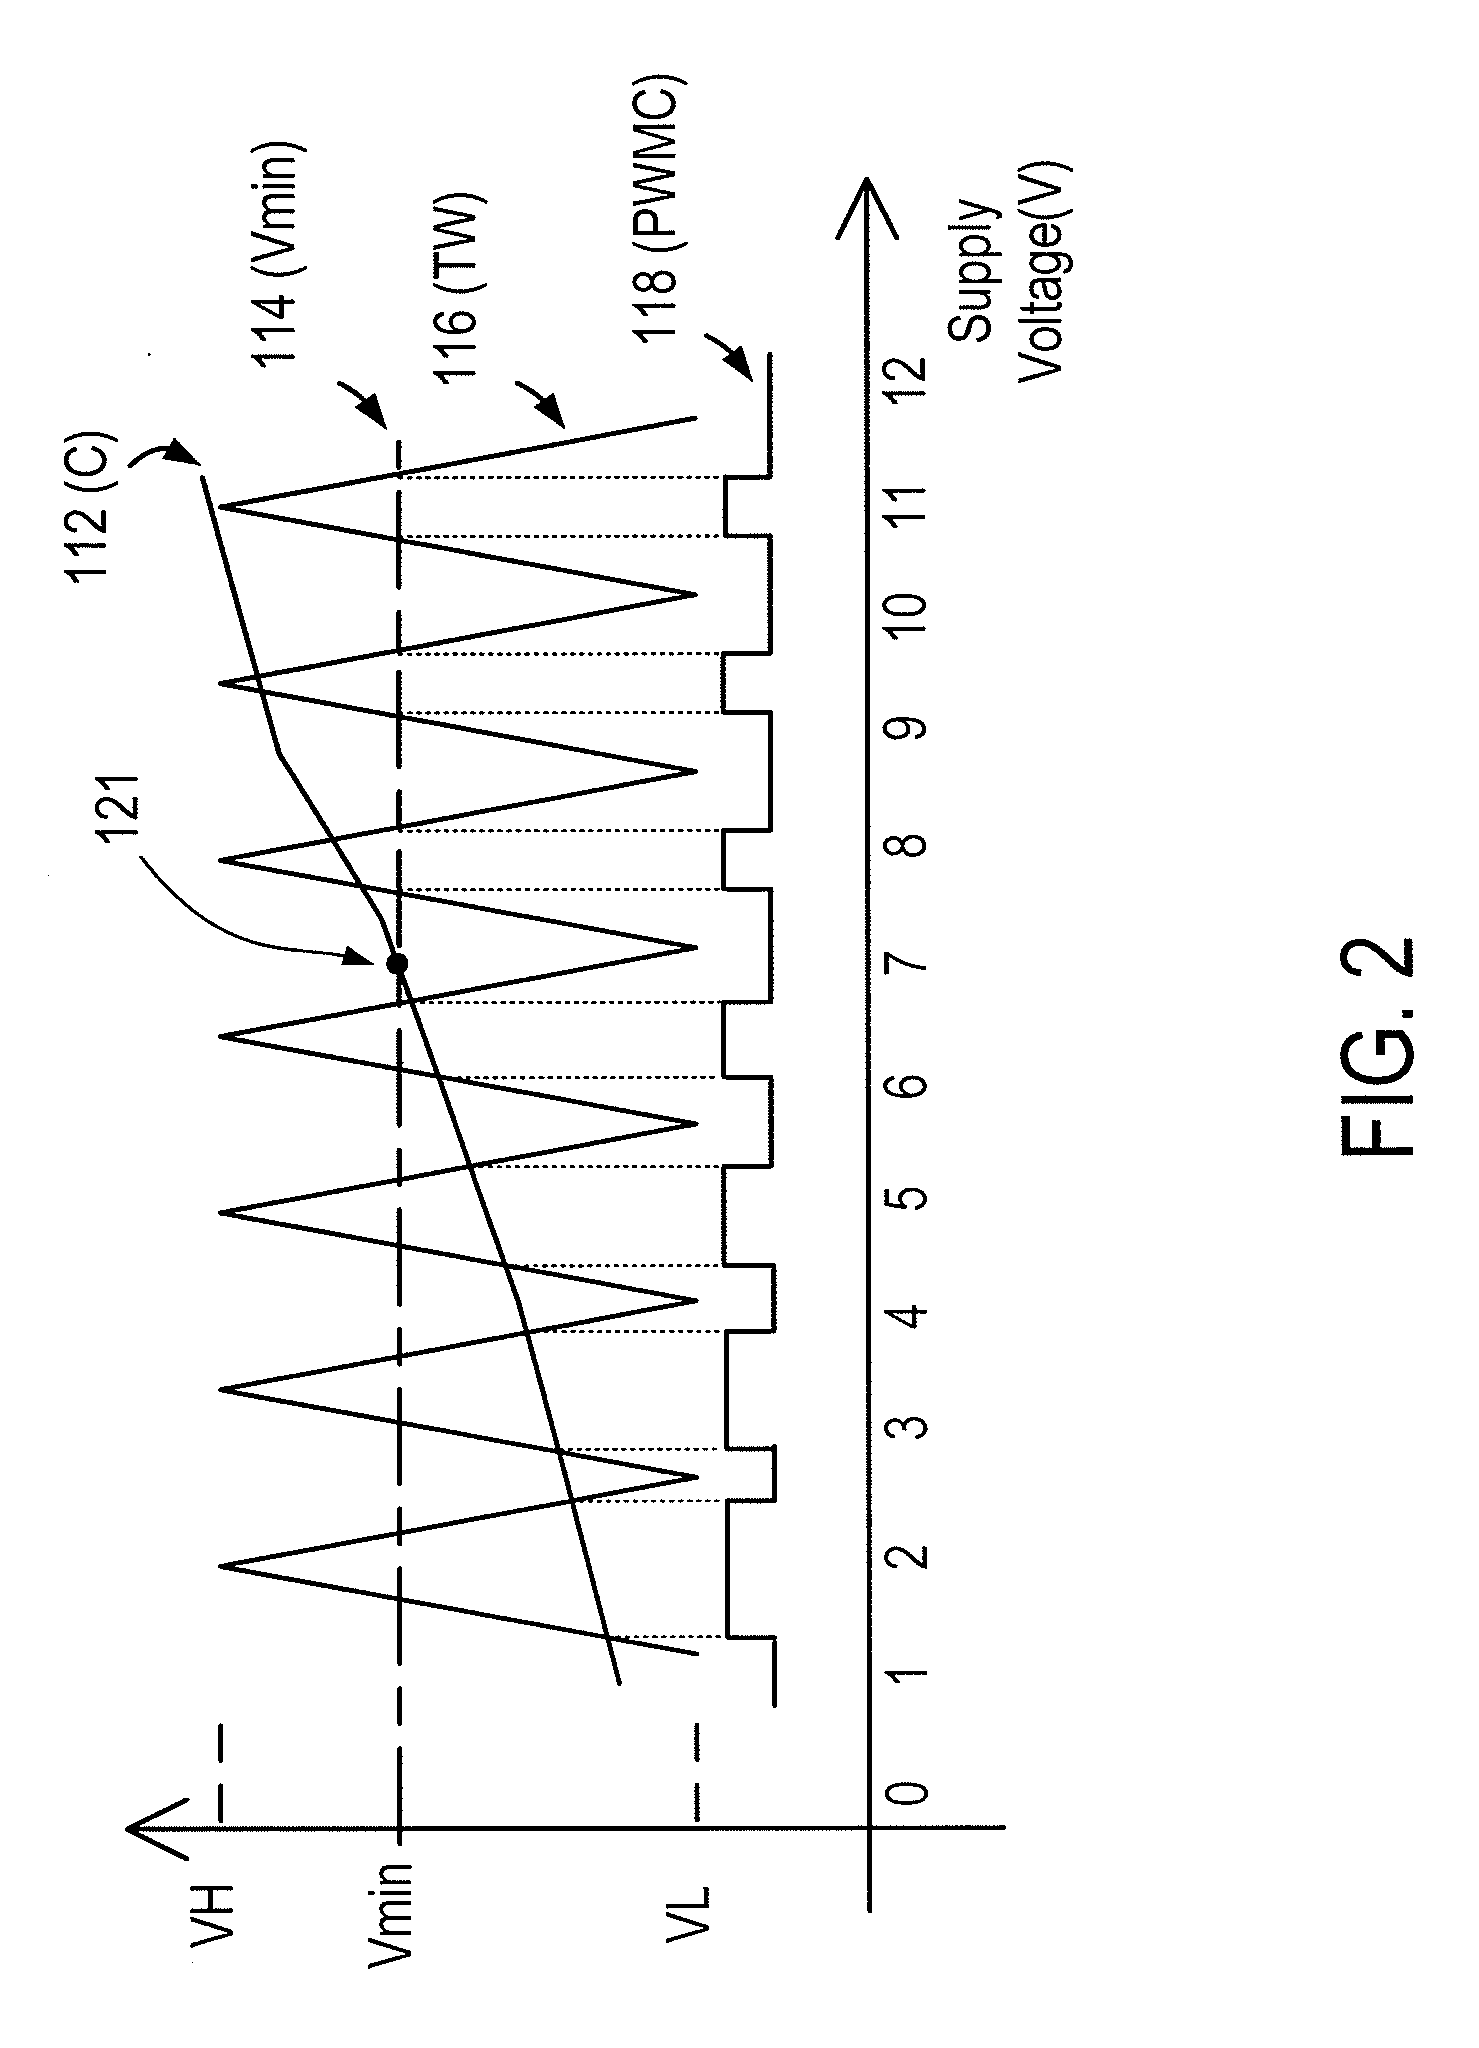 Pulsed width modulated control method and apparatus